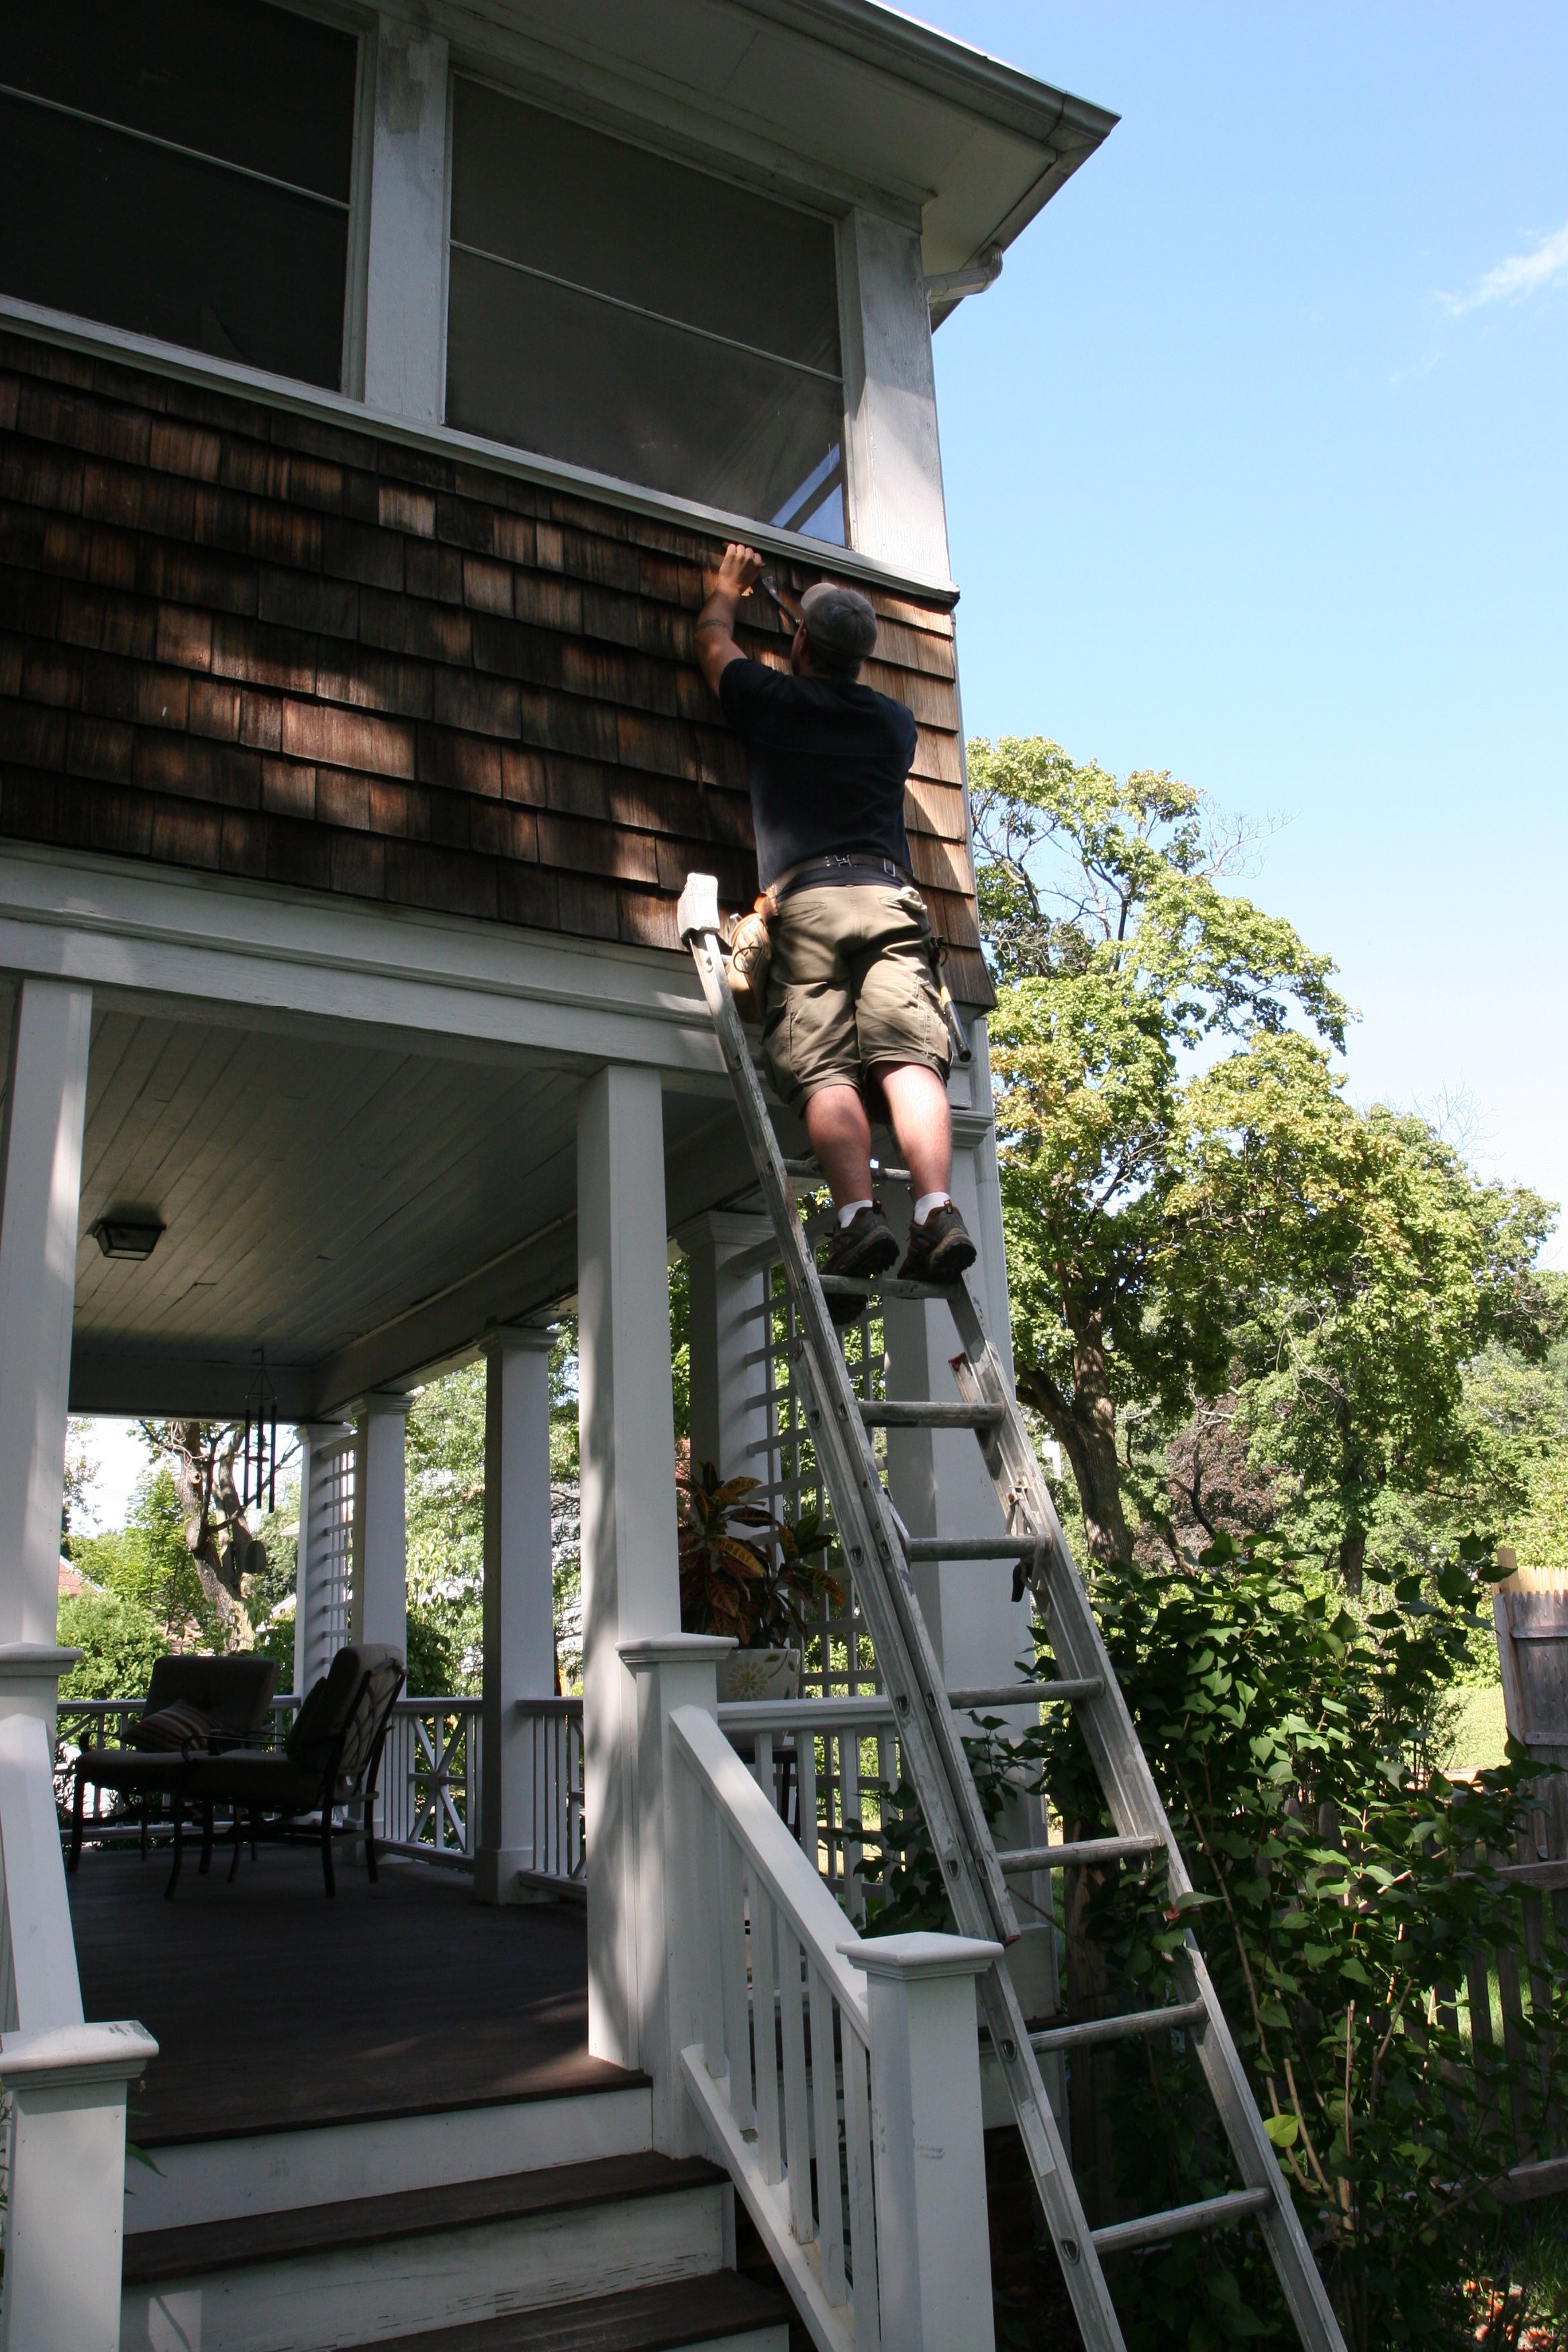 Dave removing aged shingles to replace on the driveway side of the house.